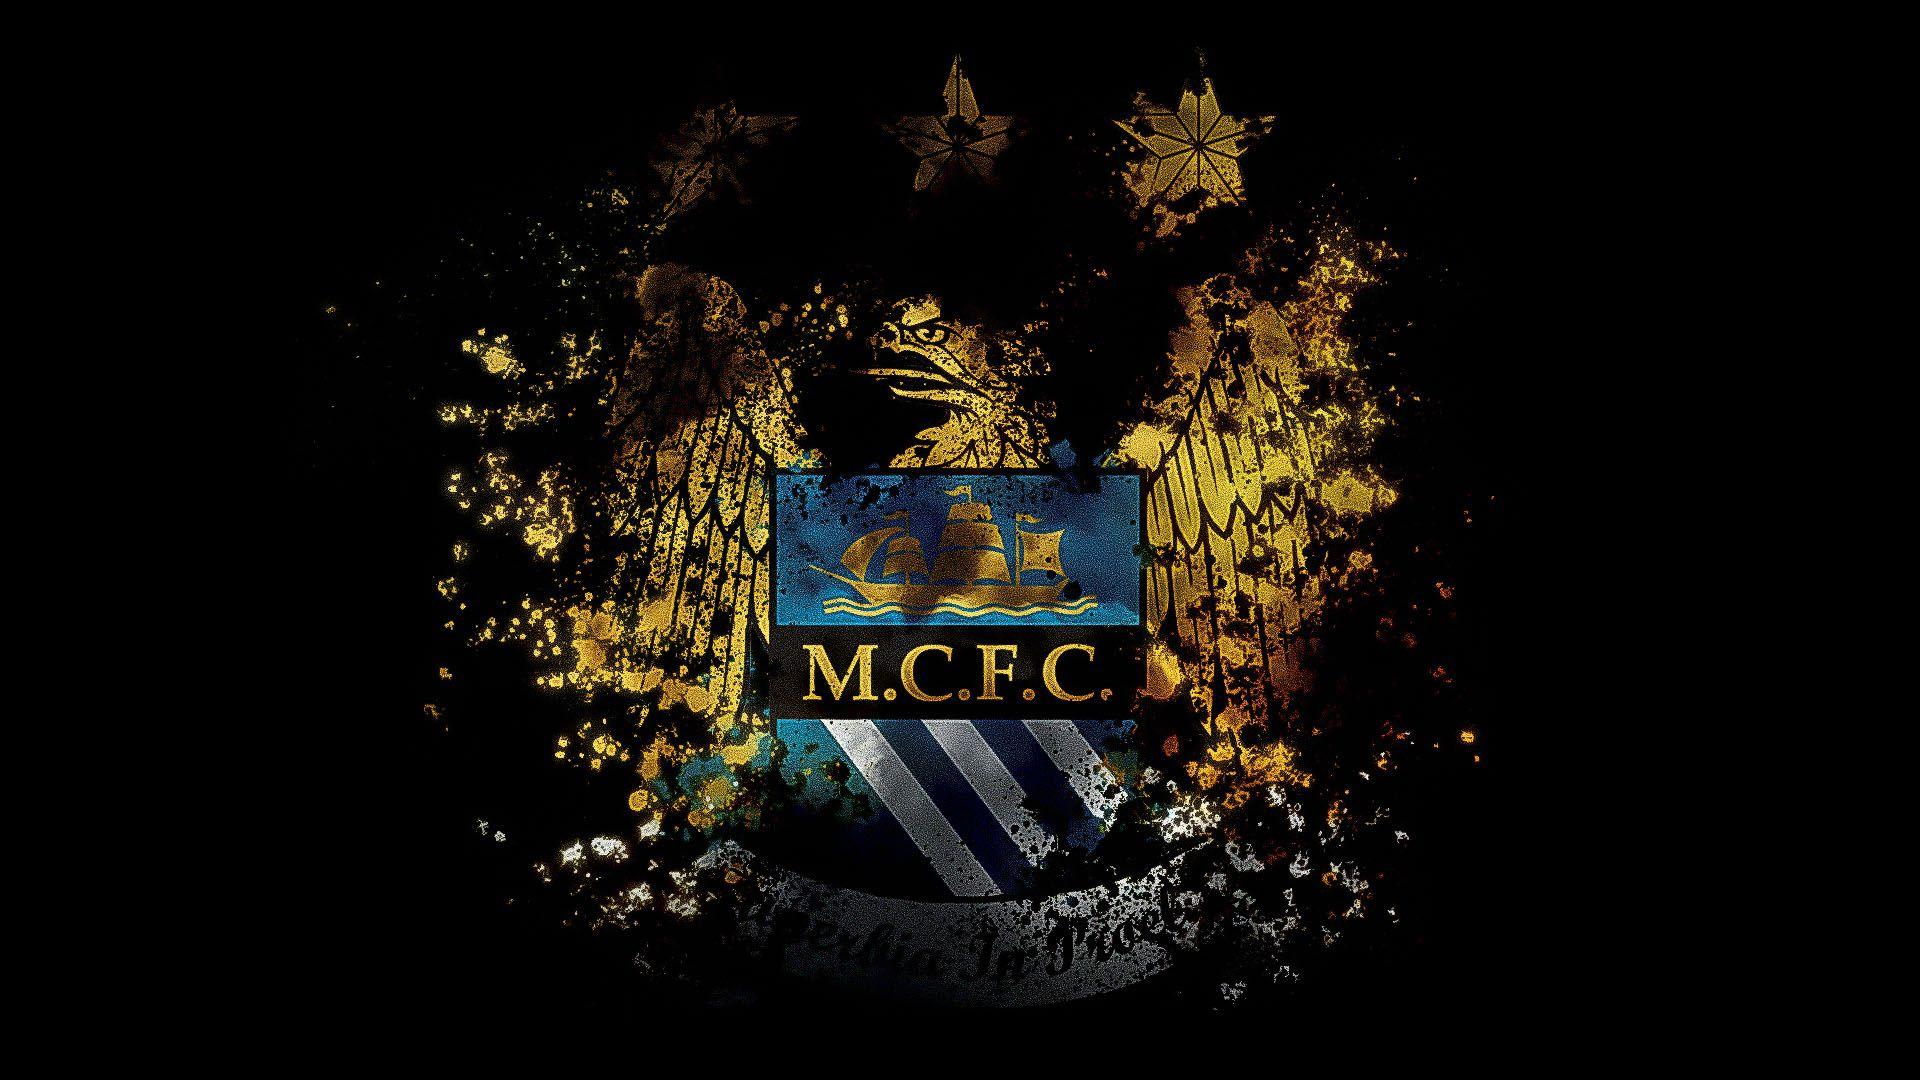 Wallpapers PC Manchester City - Wallpaper Cave